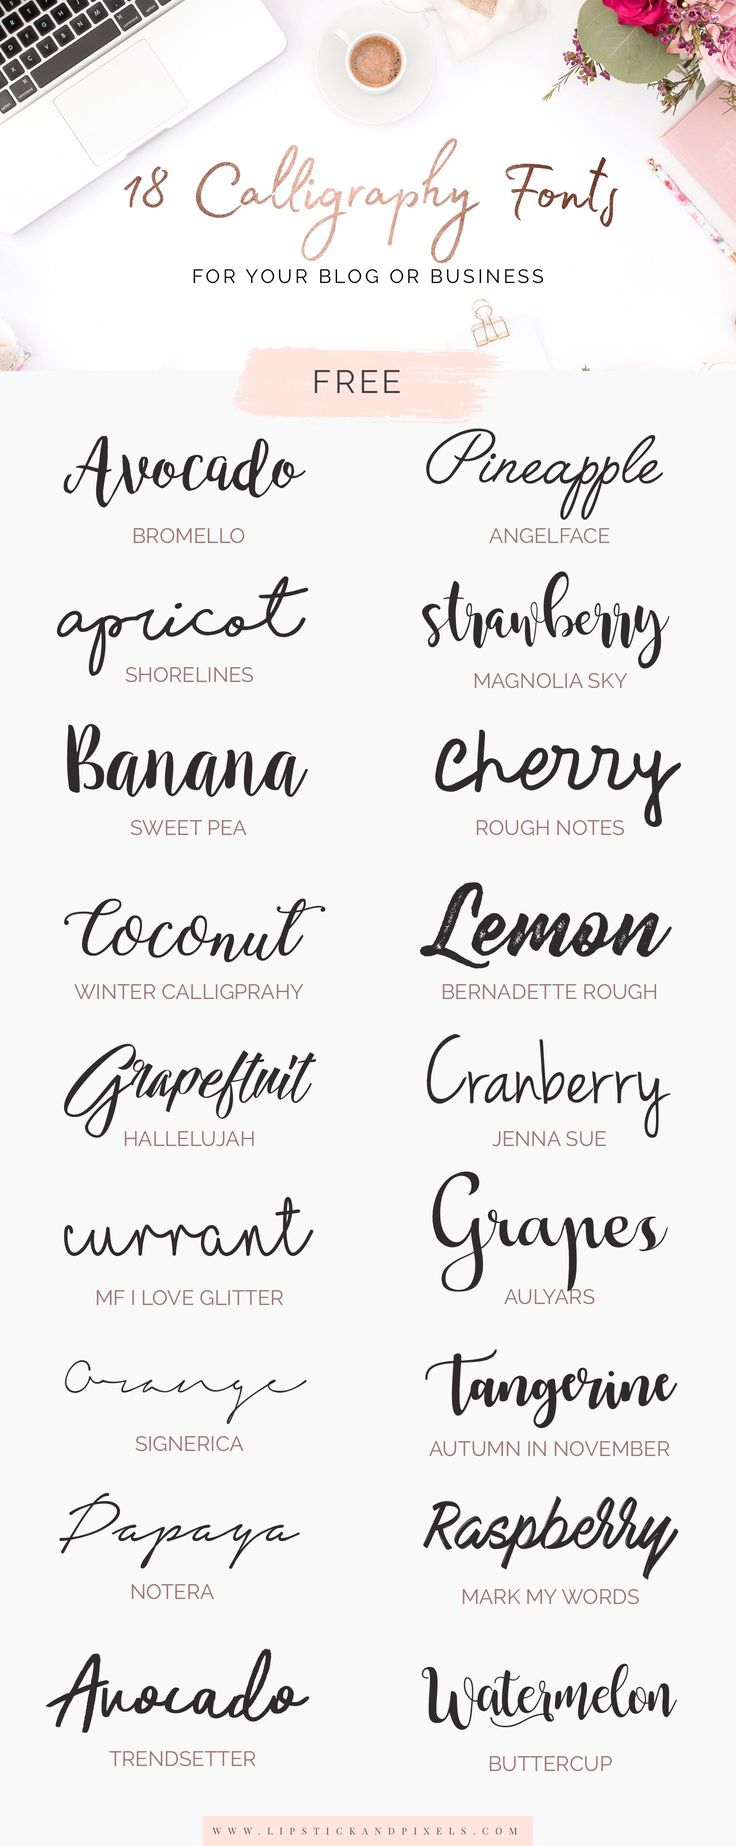 18 free calligraphy fonts for your blog or business